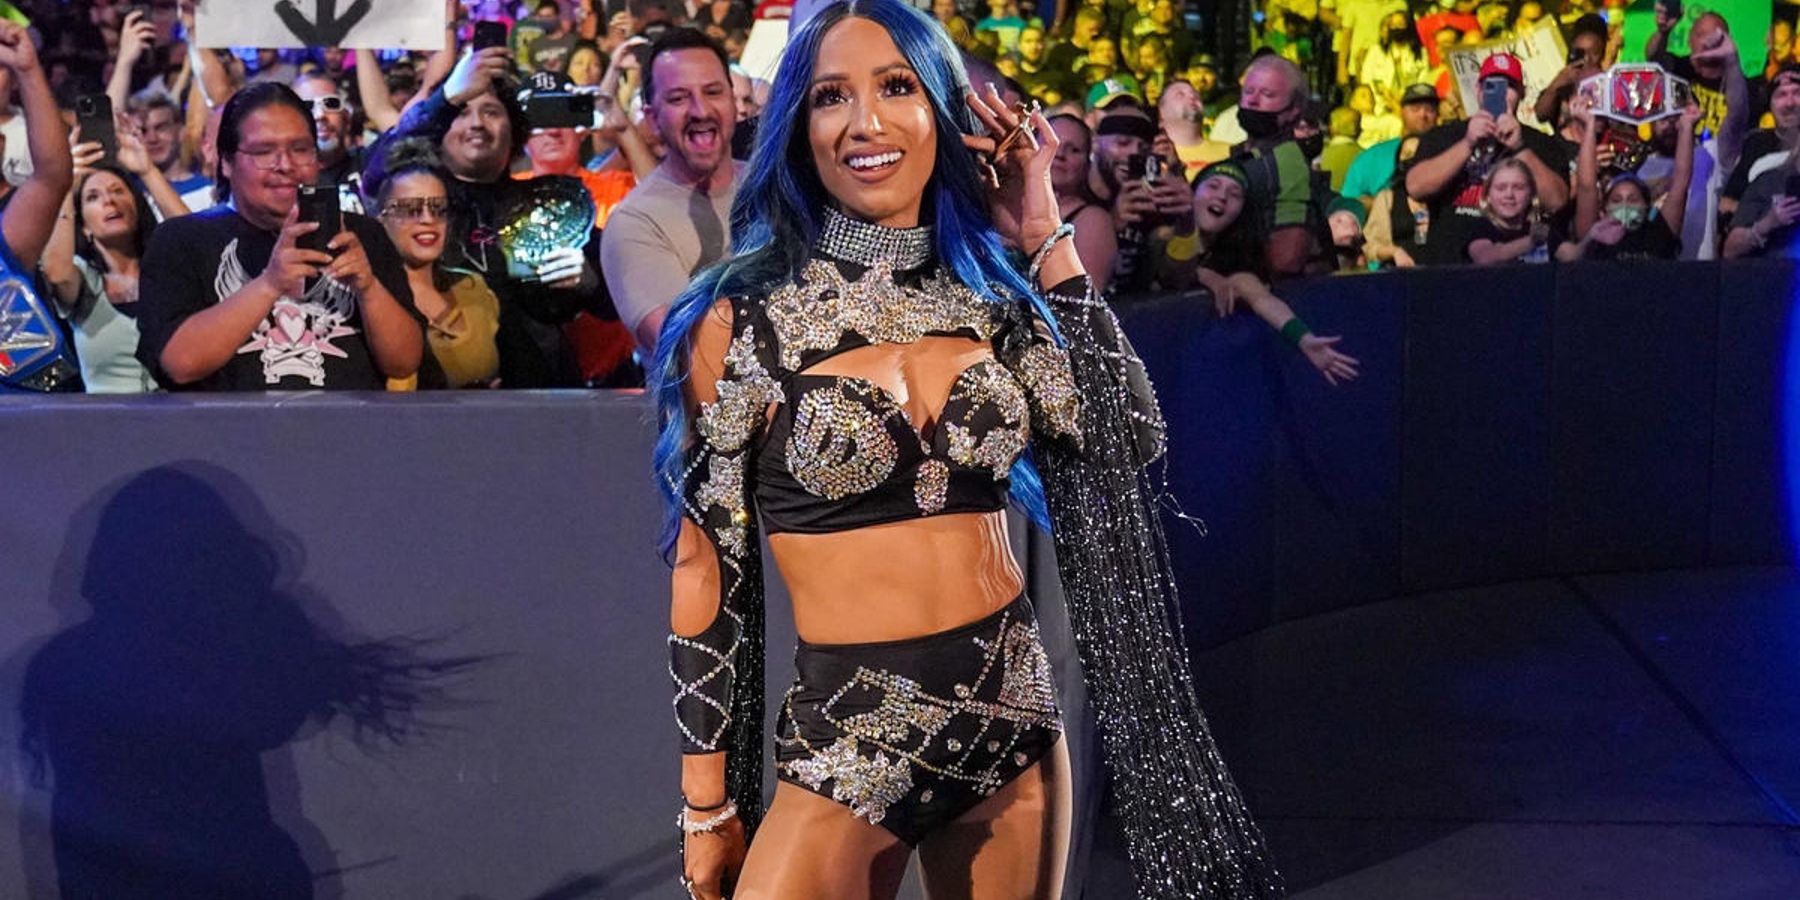 Sasha Banks makes her way to the ring while she was still with WWE.